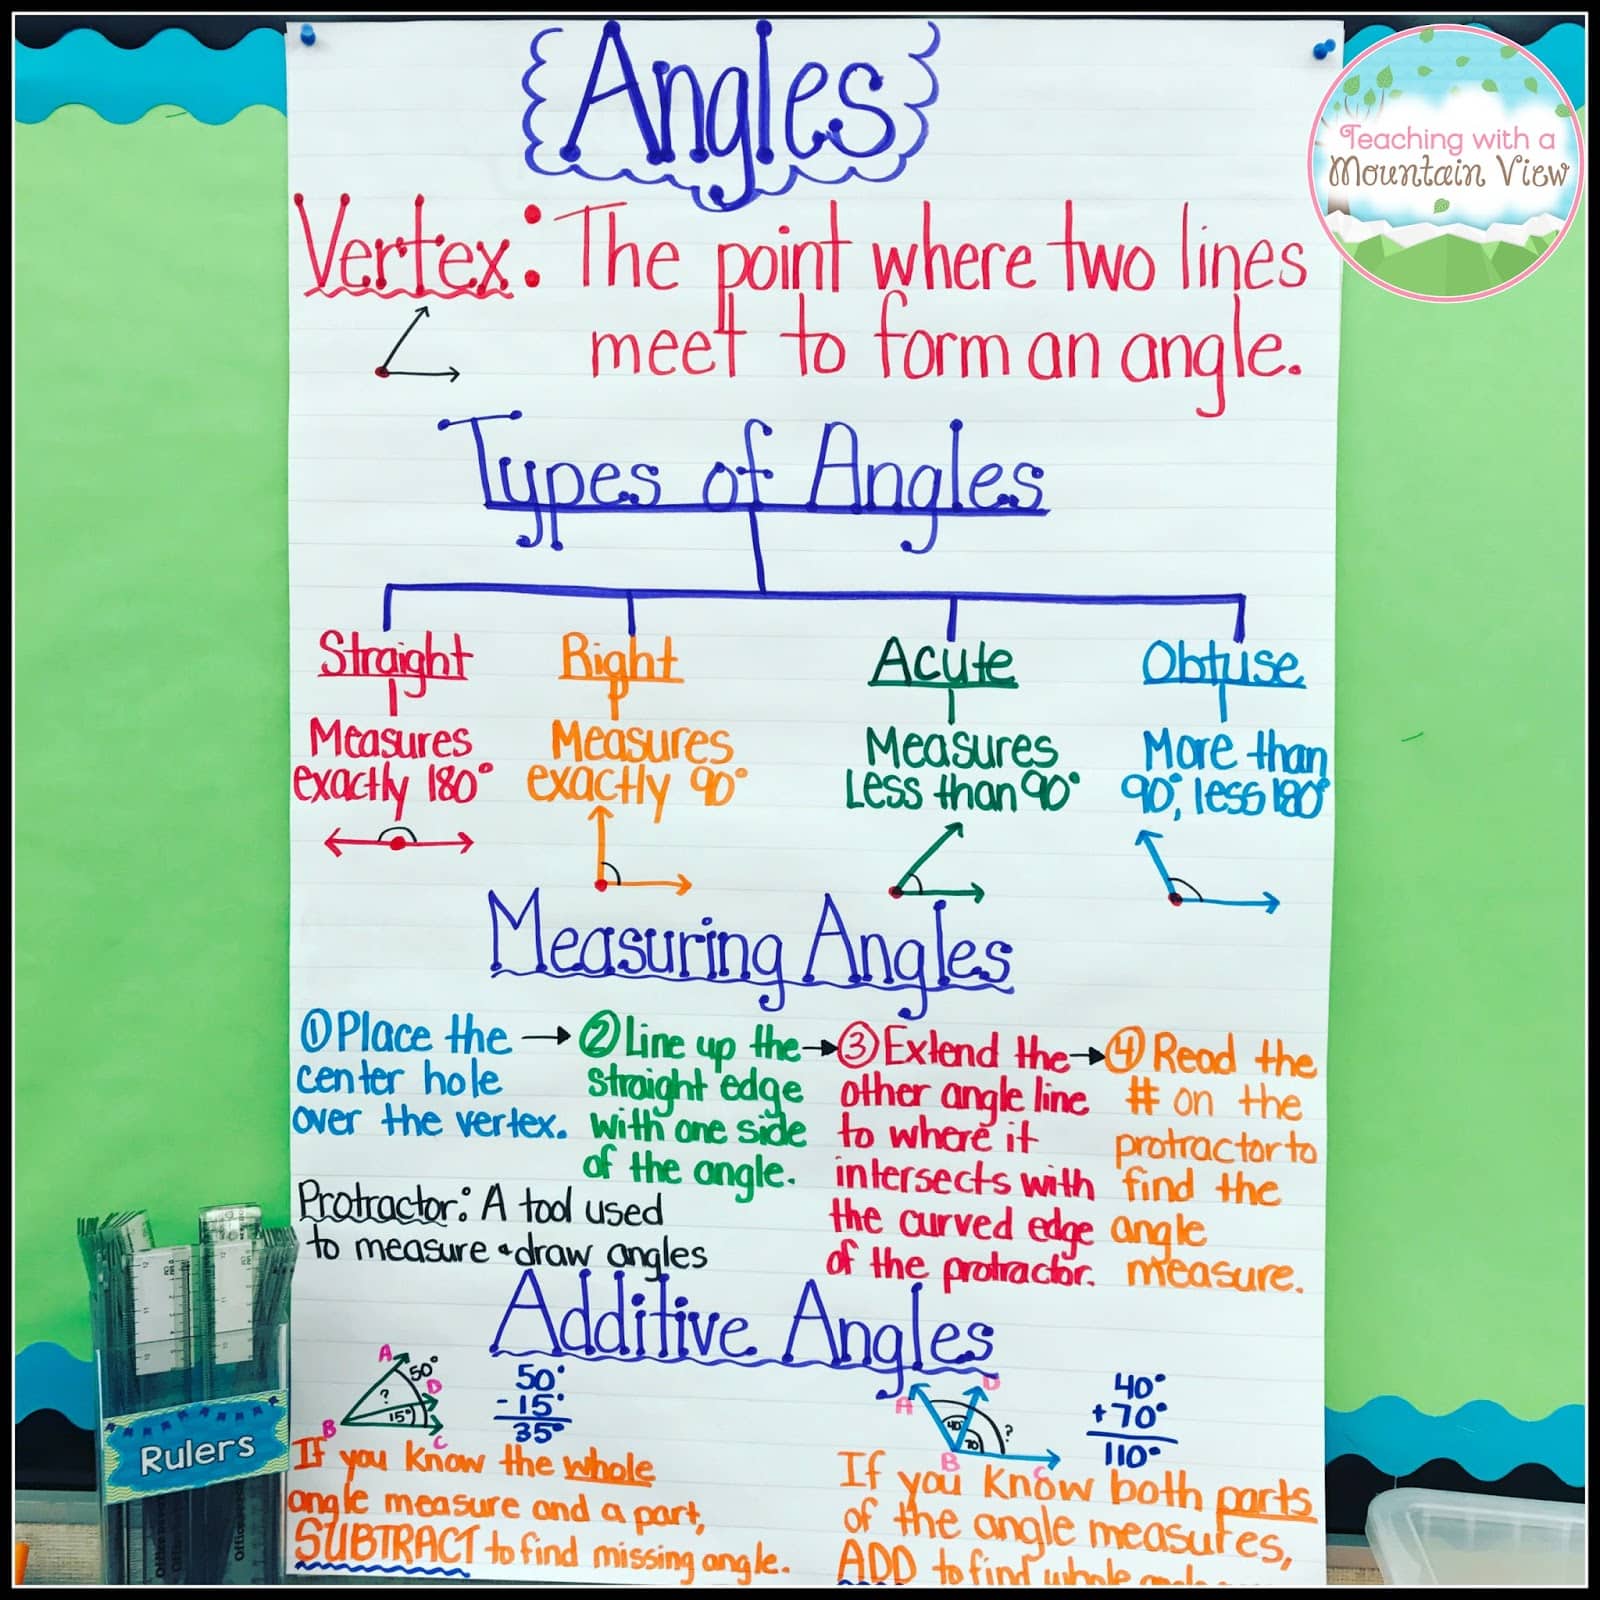 Types of Angles and Measuring Angles Anchor Chart